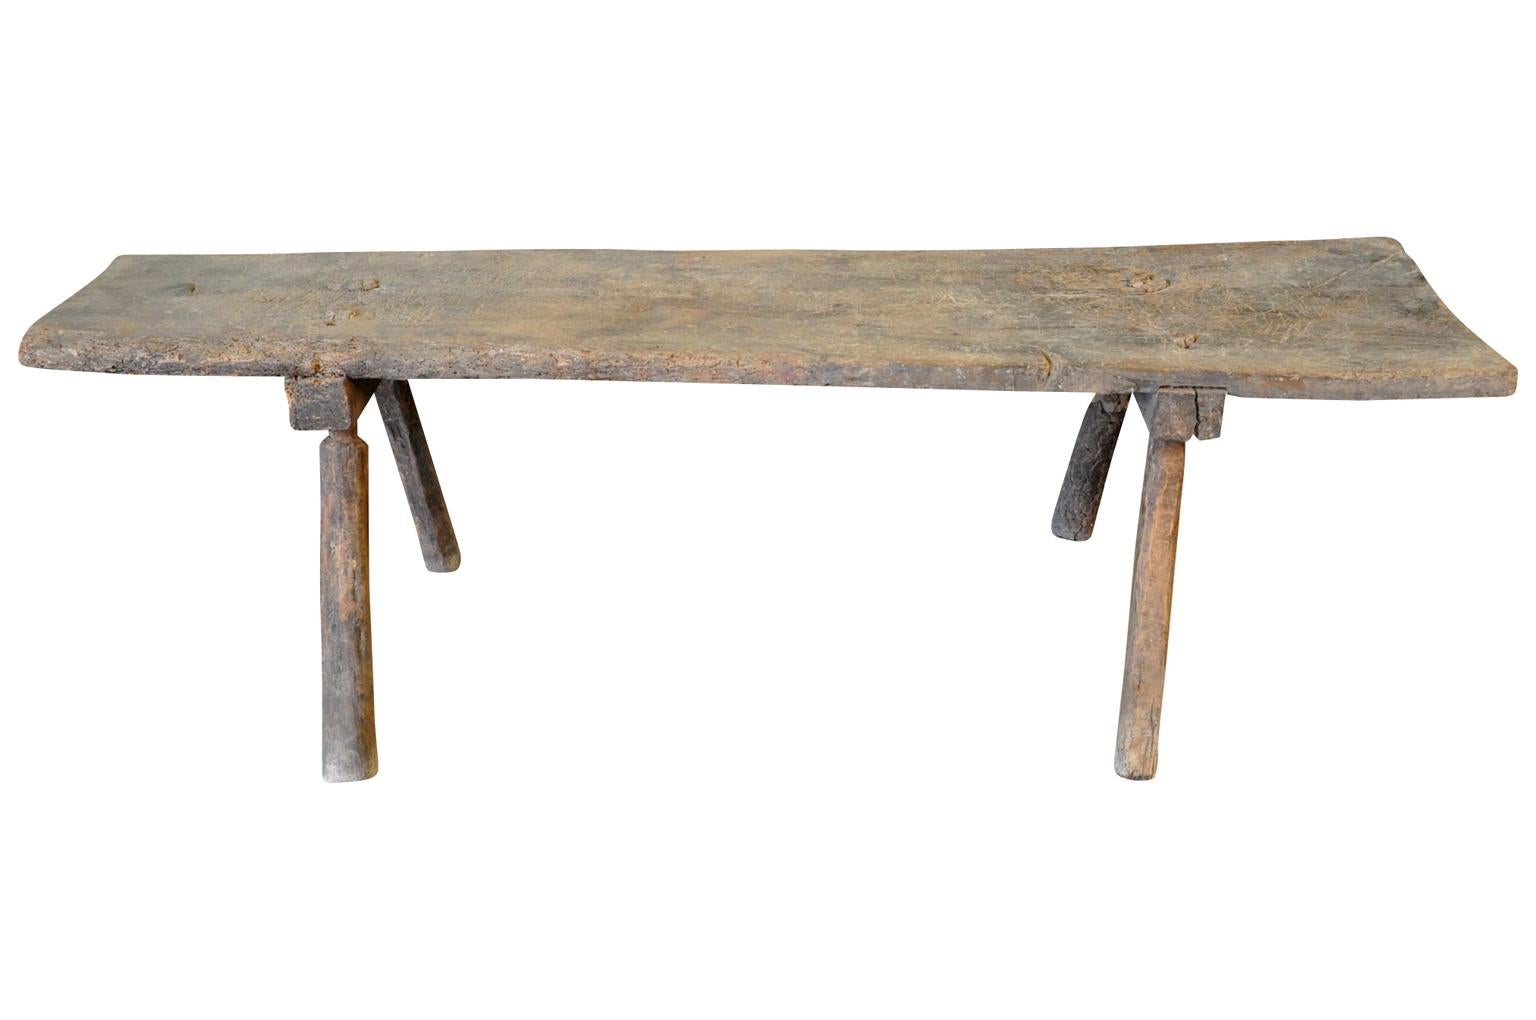 A very charming 18th century primitive bench from Northern Spain. Soundly constructed from naturally washed chestnut - with a solid board seat and splayed legs. Terrific patina. Also wonderful as a coffee or cocktail table.